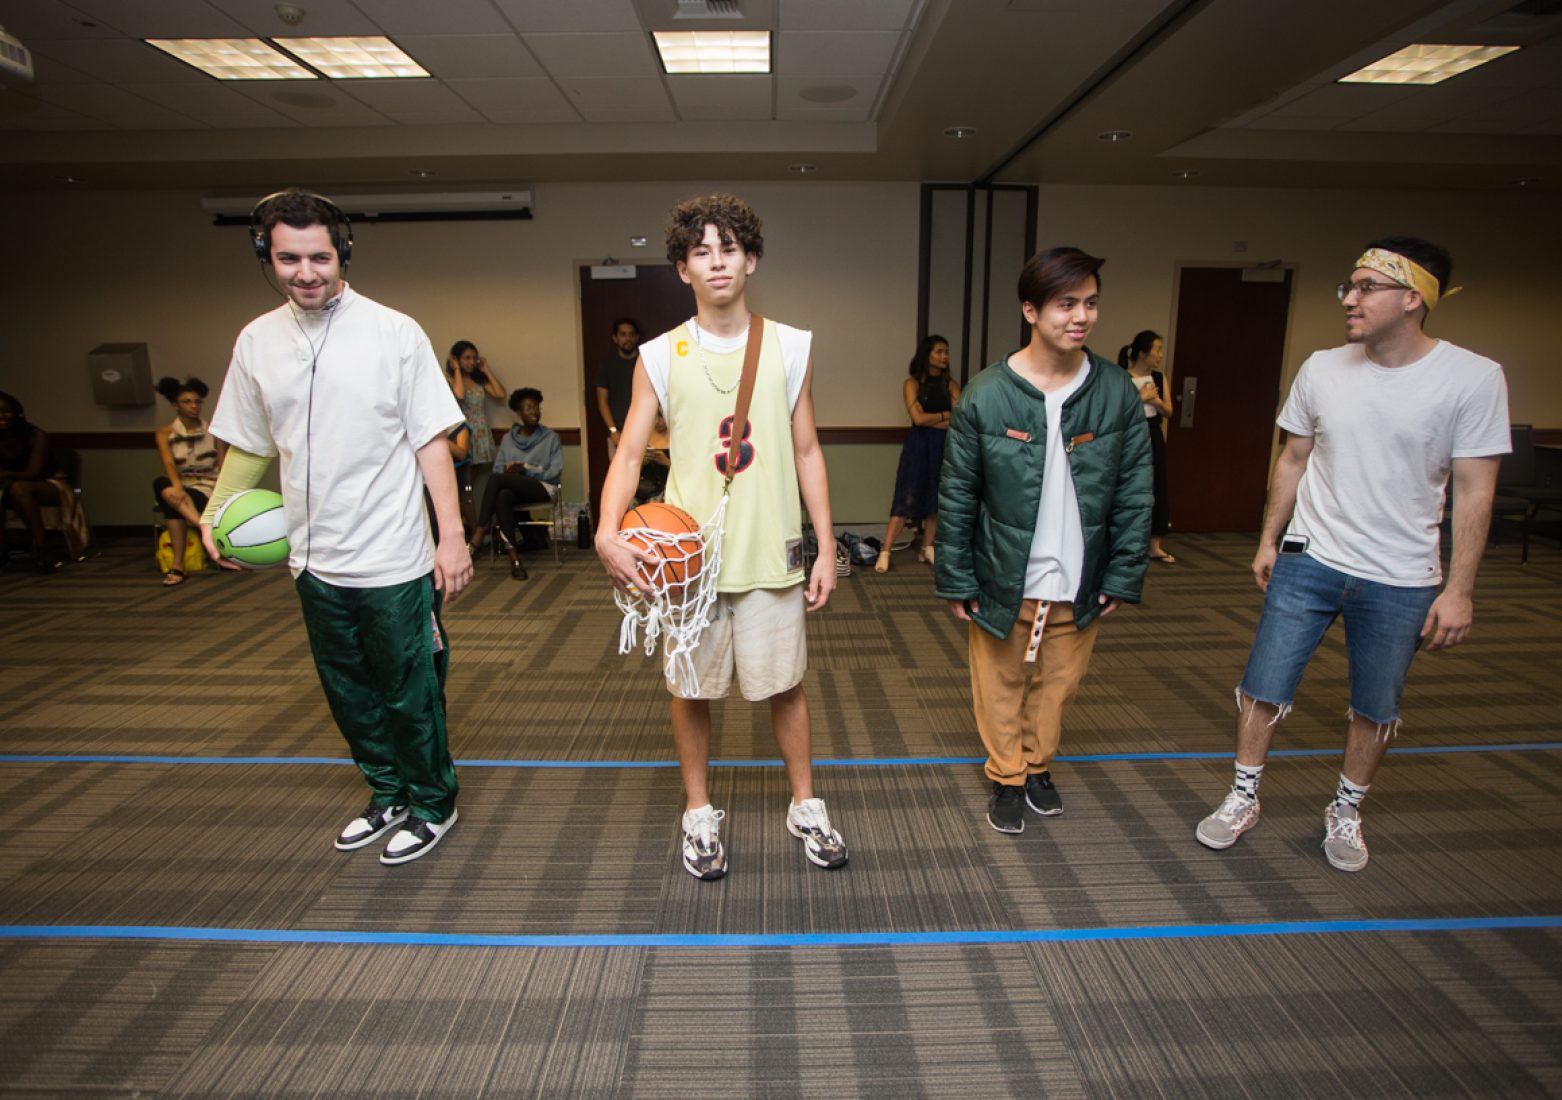 Menswear designer Jose Avila, far right, stands next to his models during rehearsal in the University Union Foothill Suite on Wednesday. (Photo by Nicole Fowler)